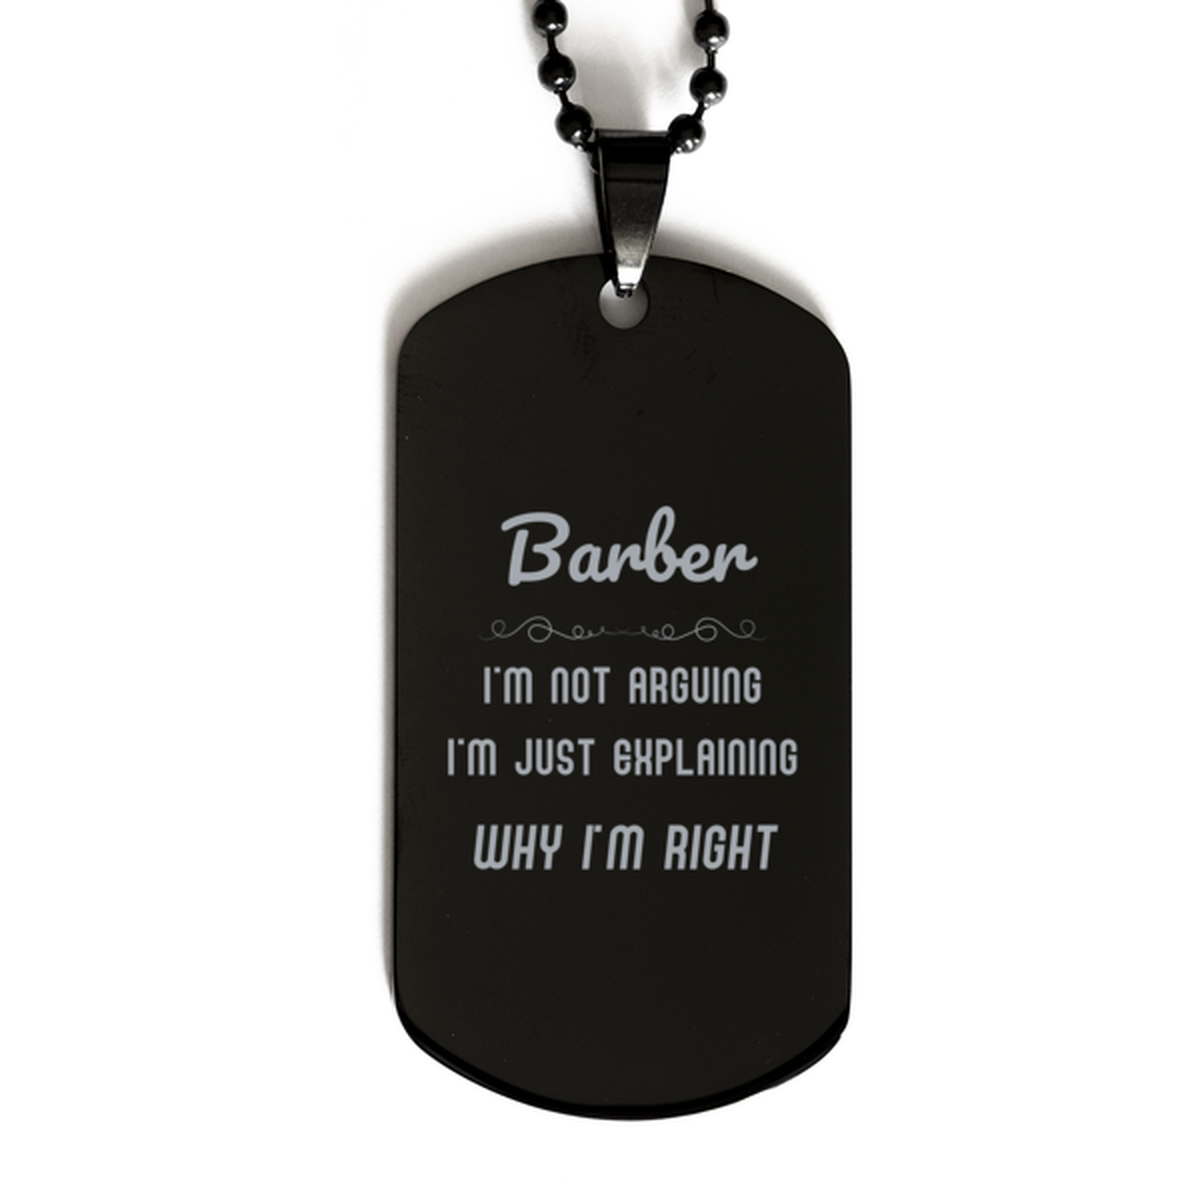 Barber I'm not Arguing. I'm Just Explaining Why I'm RIGHT Black Dog Tag, Funny Saying Quote Barber Gifts For Barber Graduation Birthday Christmas Gifts for Men Women Coworker